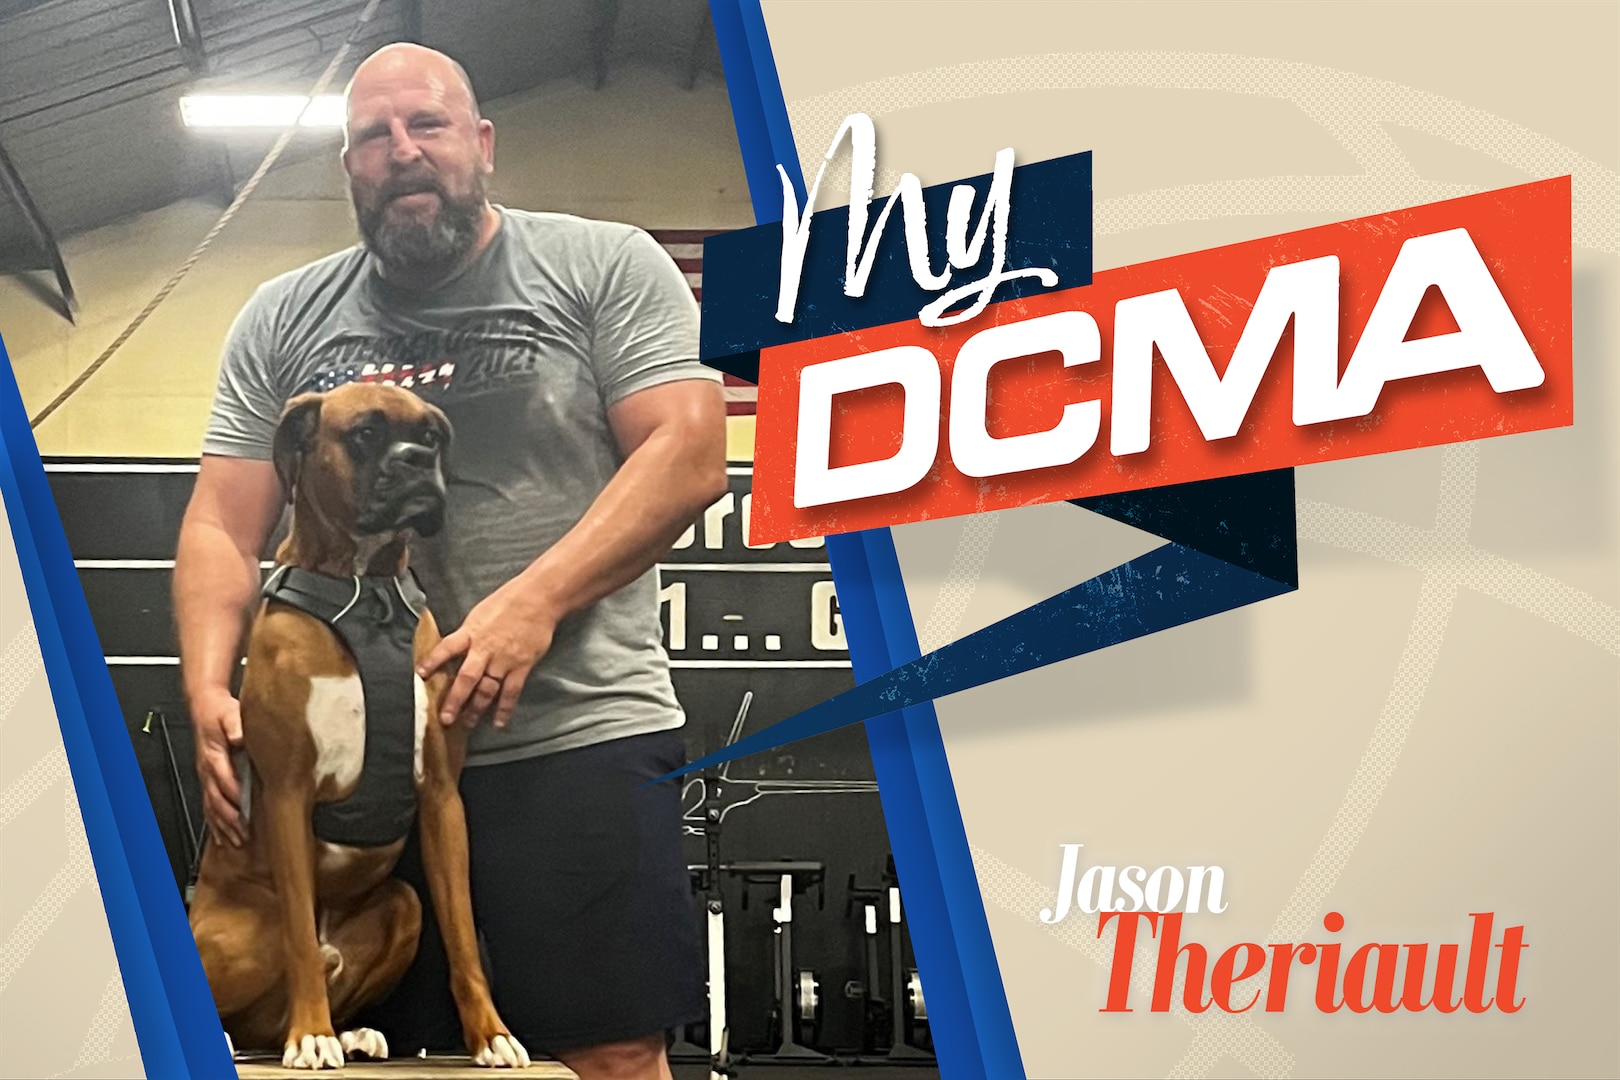 This graphic features a photo of a man posing with a dog and text on the graphic says: My DCMA Jason Theriault